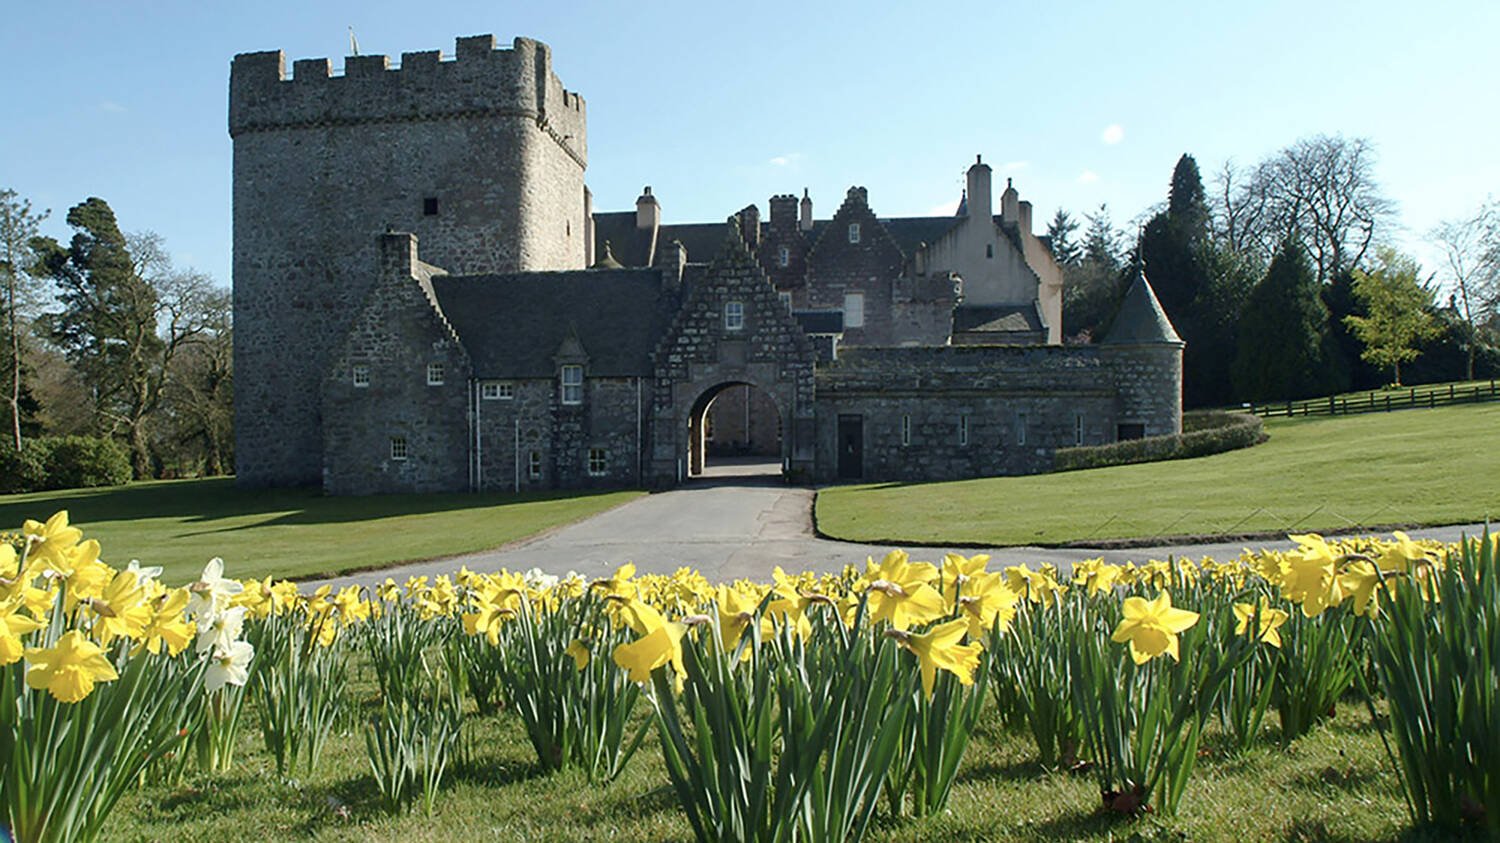 A view of Drum Castle with bright clumps of yellow and white daffodils growing in the foreground.